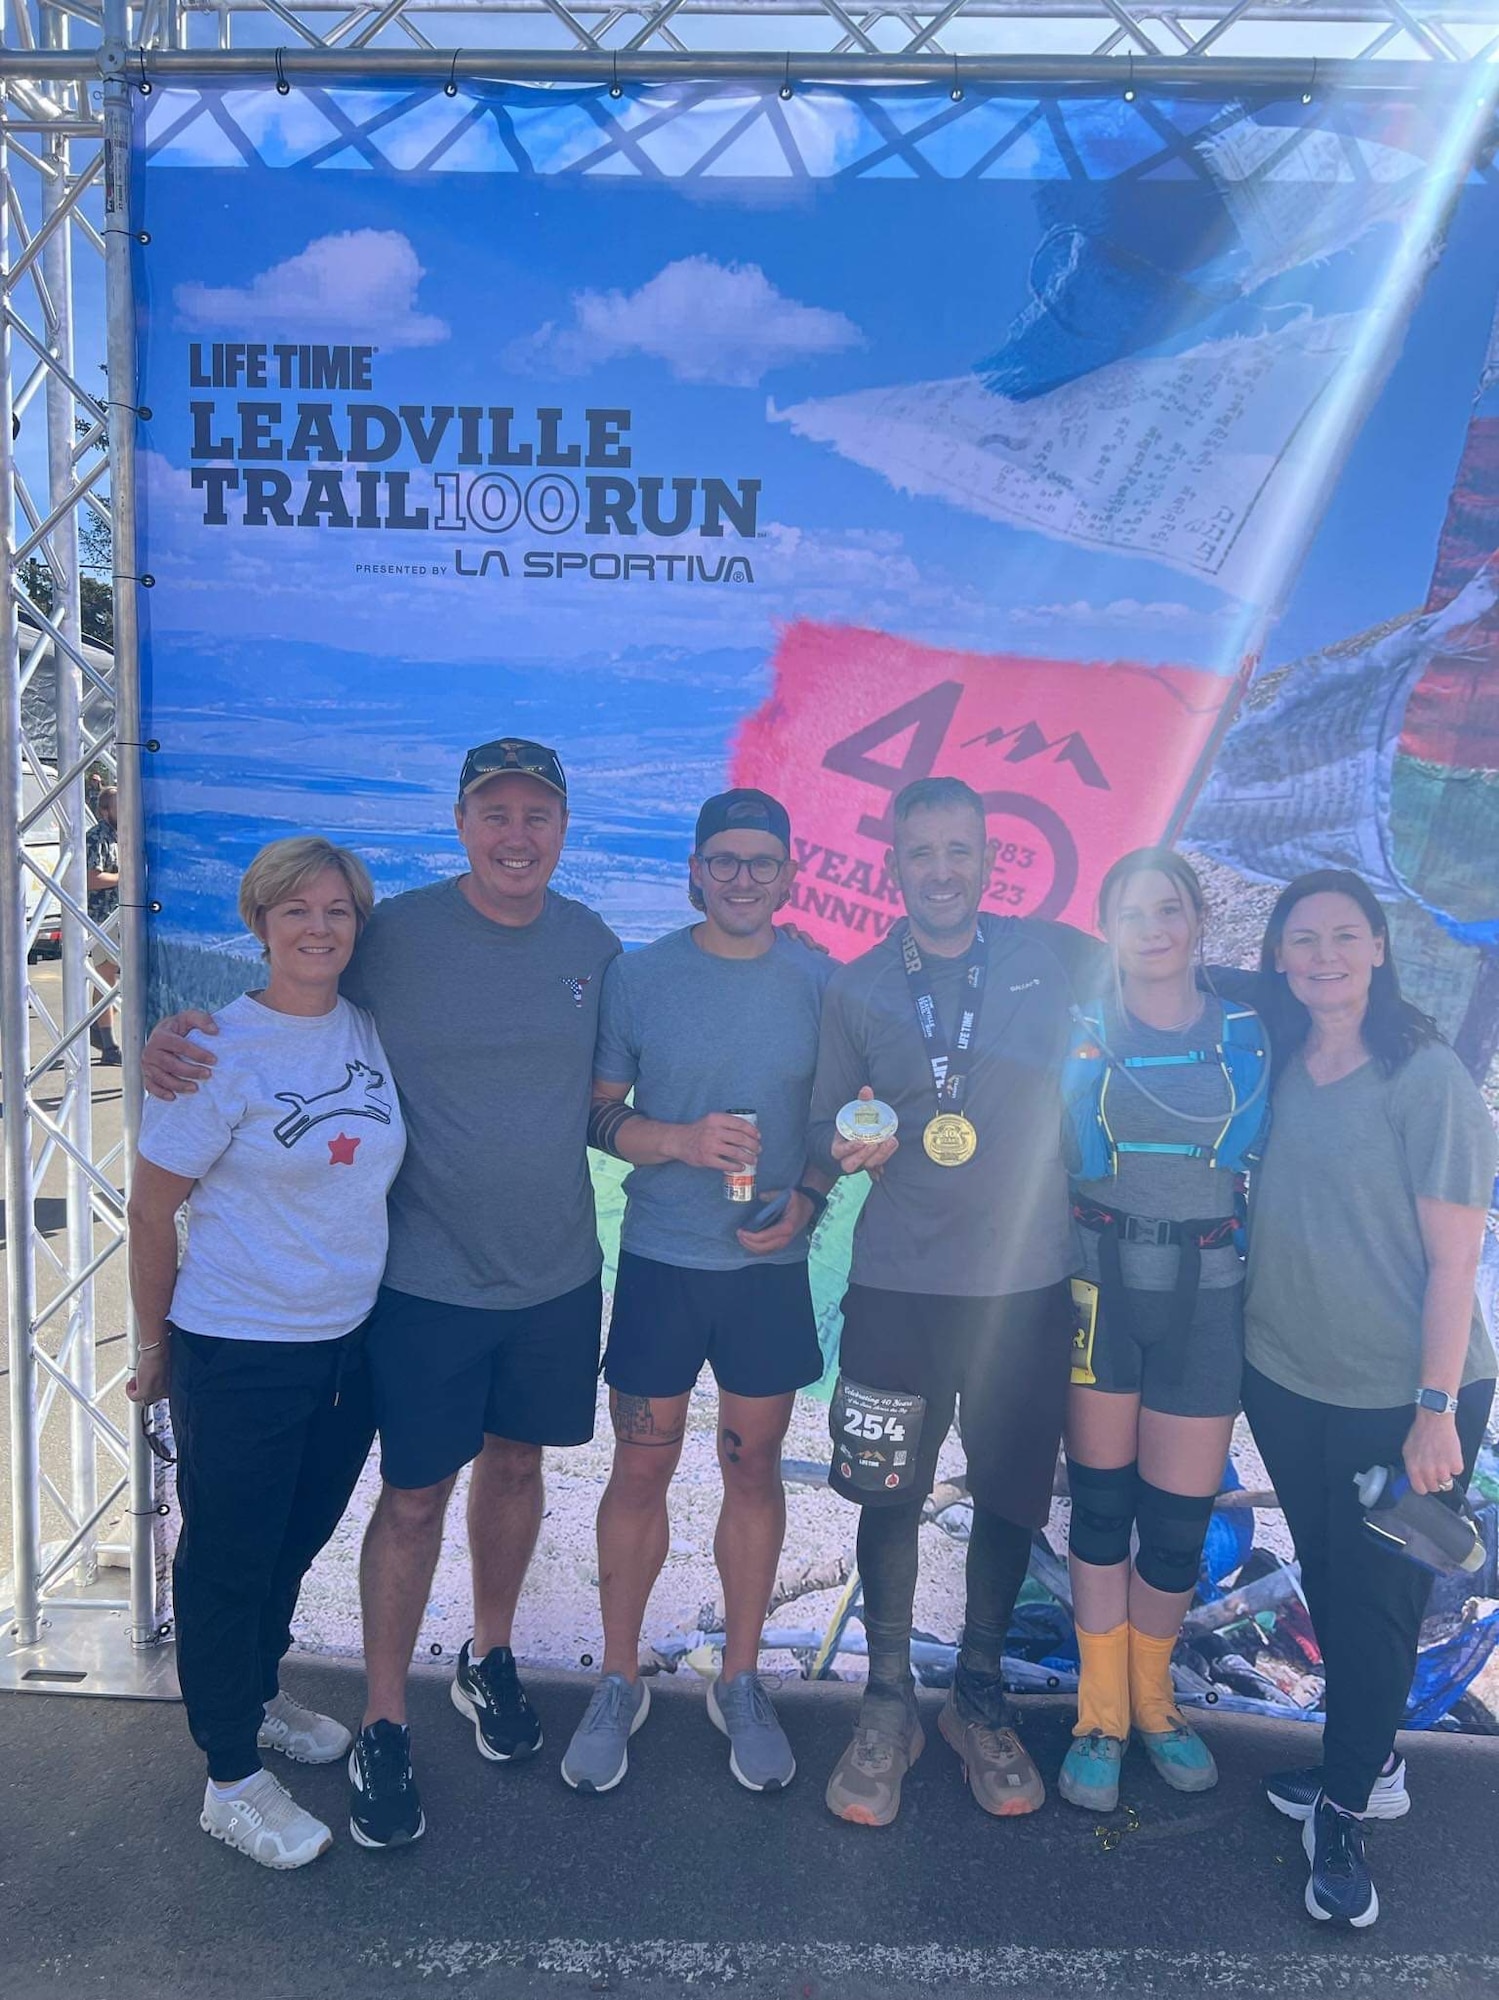 (From left to right) Kristen Barker, Matt Barker, Benjamin Shearer, Patrick Buzzard, Hailey Buzzard, and Christine Buzzard, pose for a group photo after Patrick completed the Leadville Trail 100 Run near Leadville, Colorado, Aug. 20, 2023. The Leadville Trail 100 Run is an ultramarathon held annually on rugged trails and dirt roads through the heart of the Rocky Mountains. The course is a 50-mile out-and-back dogleg run primarily on the Colorado Trail, starting at 10,200 feet. The centerpiece of the course is the climb up to Hope Pass at 12,620 feet, encountered on both the outbound trek and on the return. Buzzard finished the 100-mile course in 29 hours, 48 minutes, and 57 seconds, just beating the 30-hour time limit. (Courtesy photo)